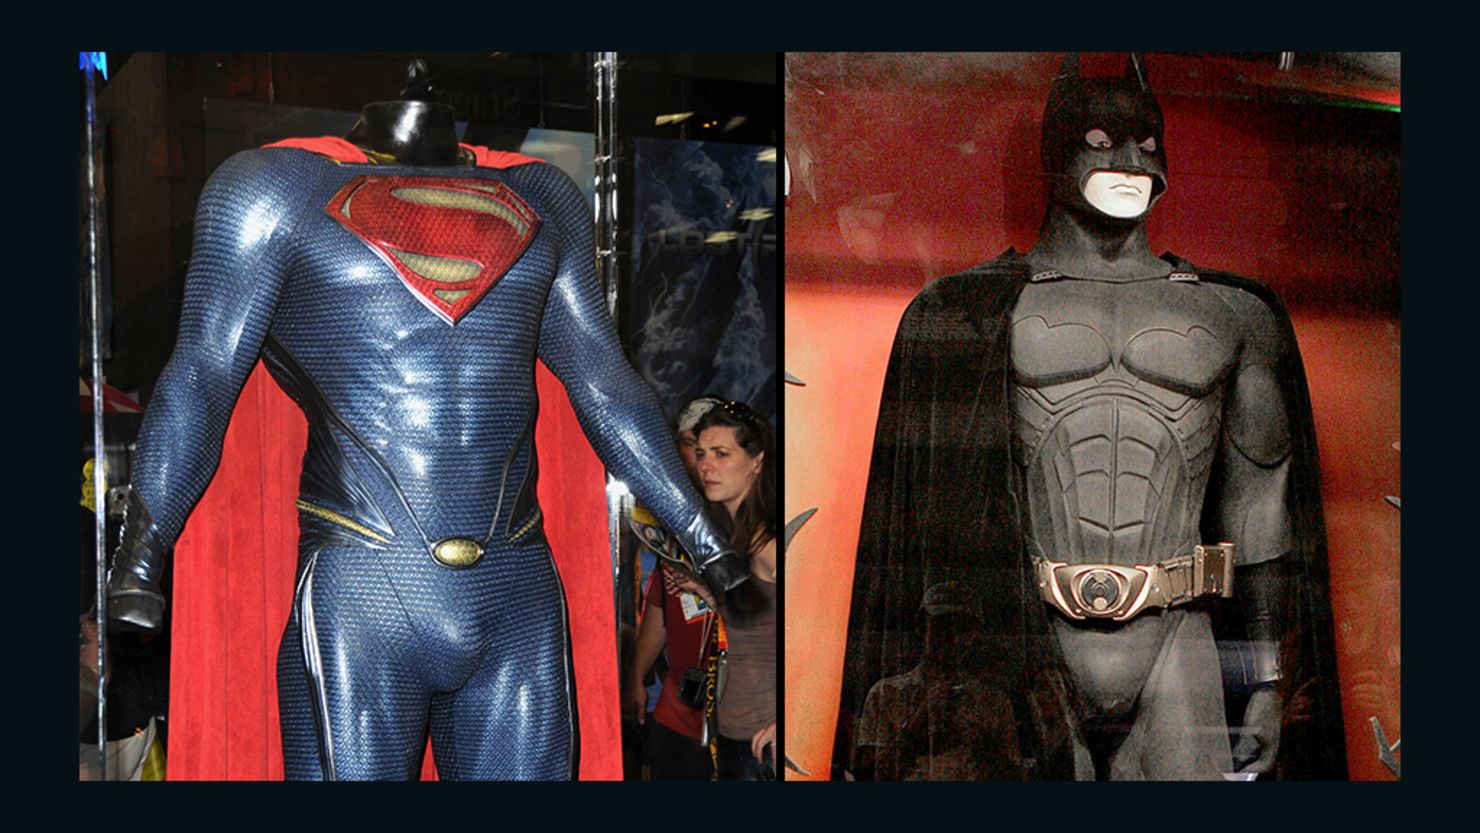 The Superman costume from "Man of Steel" and the Batman costume from "Batman Begins" are displayed in cases